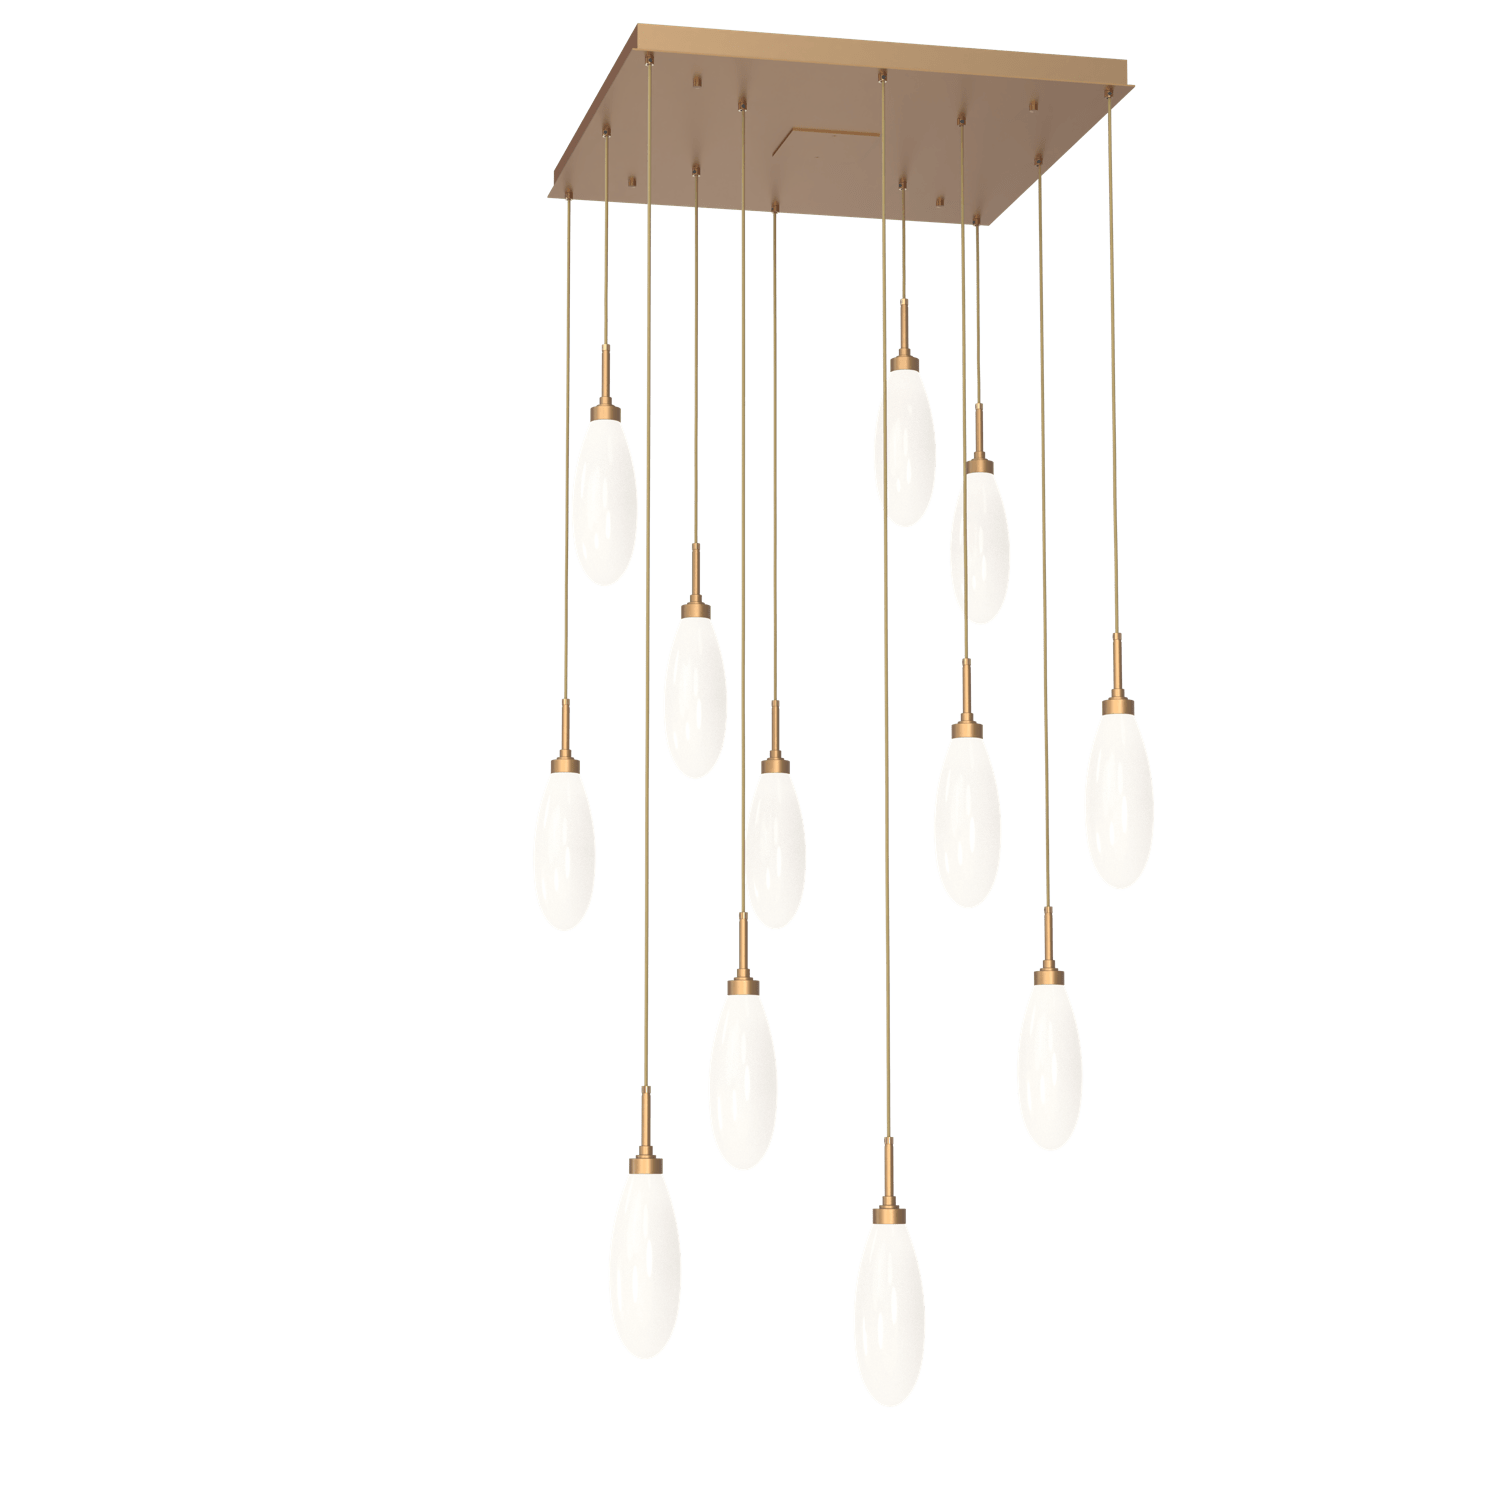 CHB0071-12-NB-WL-LL-Hammerton-Studio-Fiori-12-light-square-pendant-chandelier-with-novel-brass-finish-and-opal-white-glass-shades-and-LED-lamping